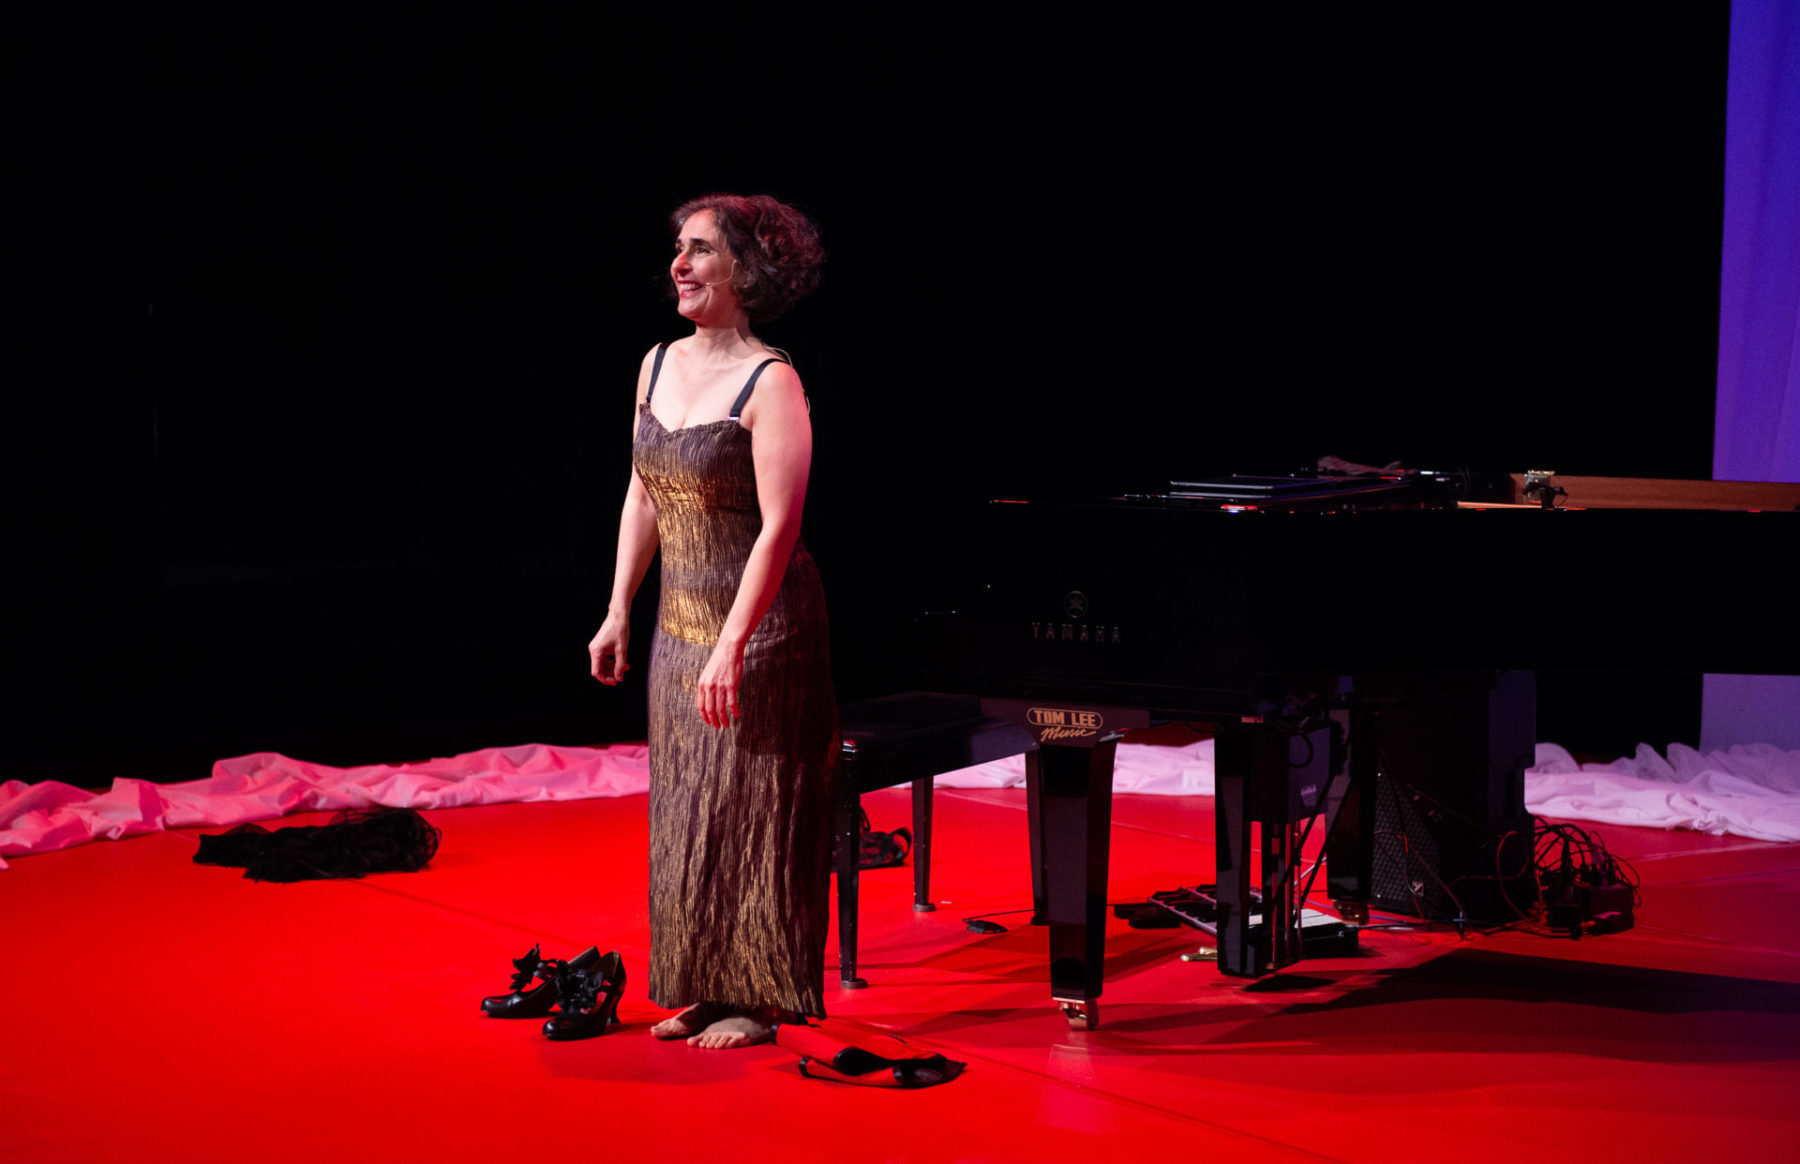 Eve Egoyan's Solo for Duet